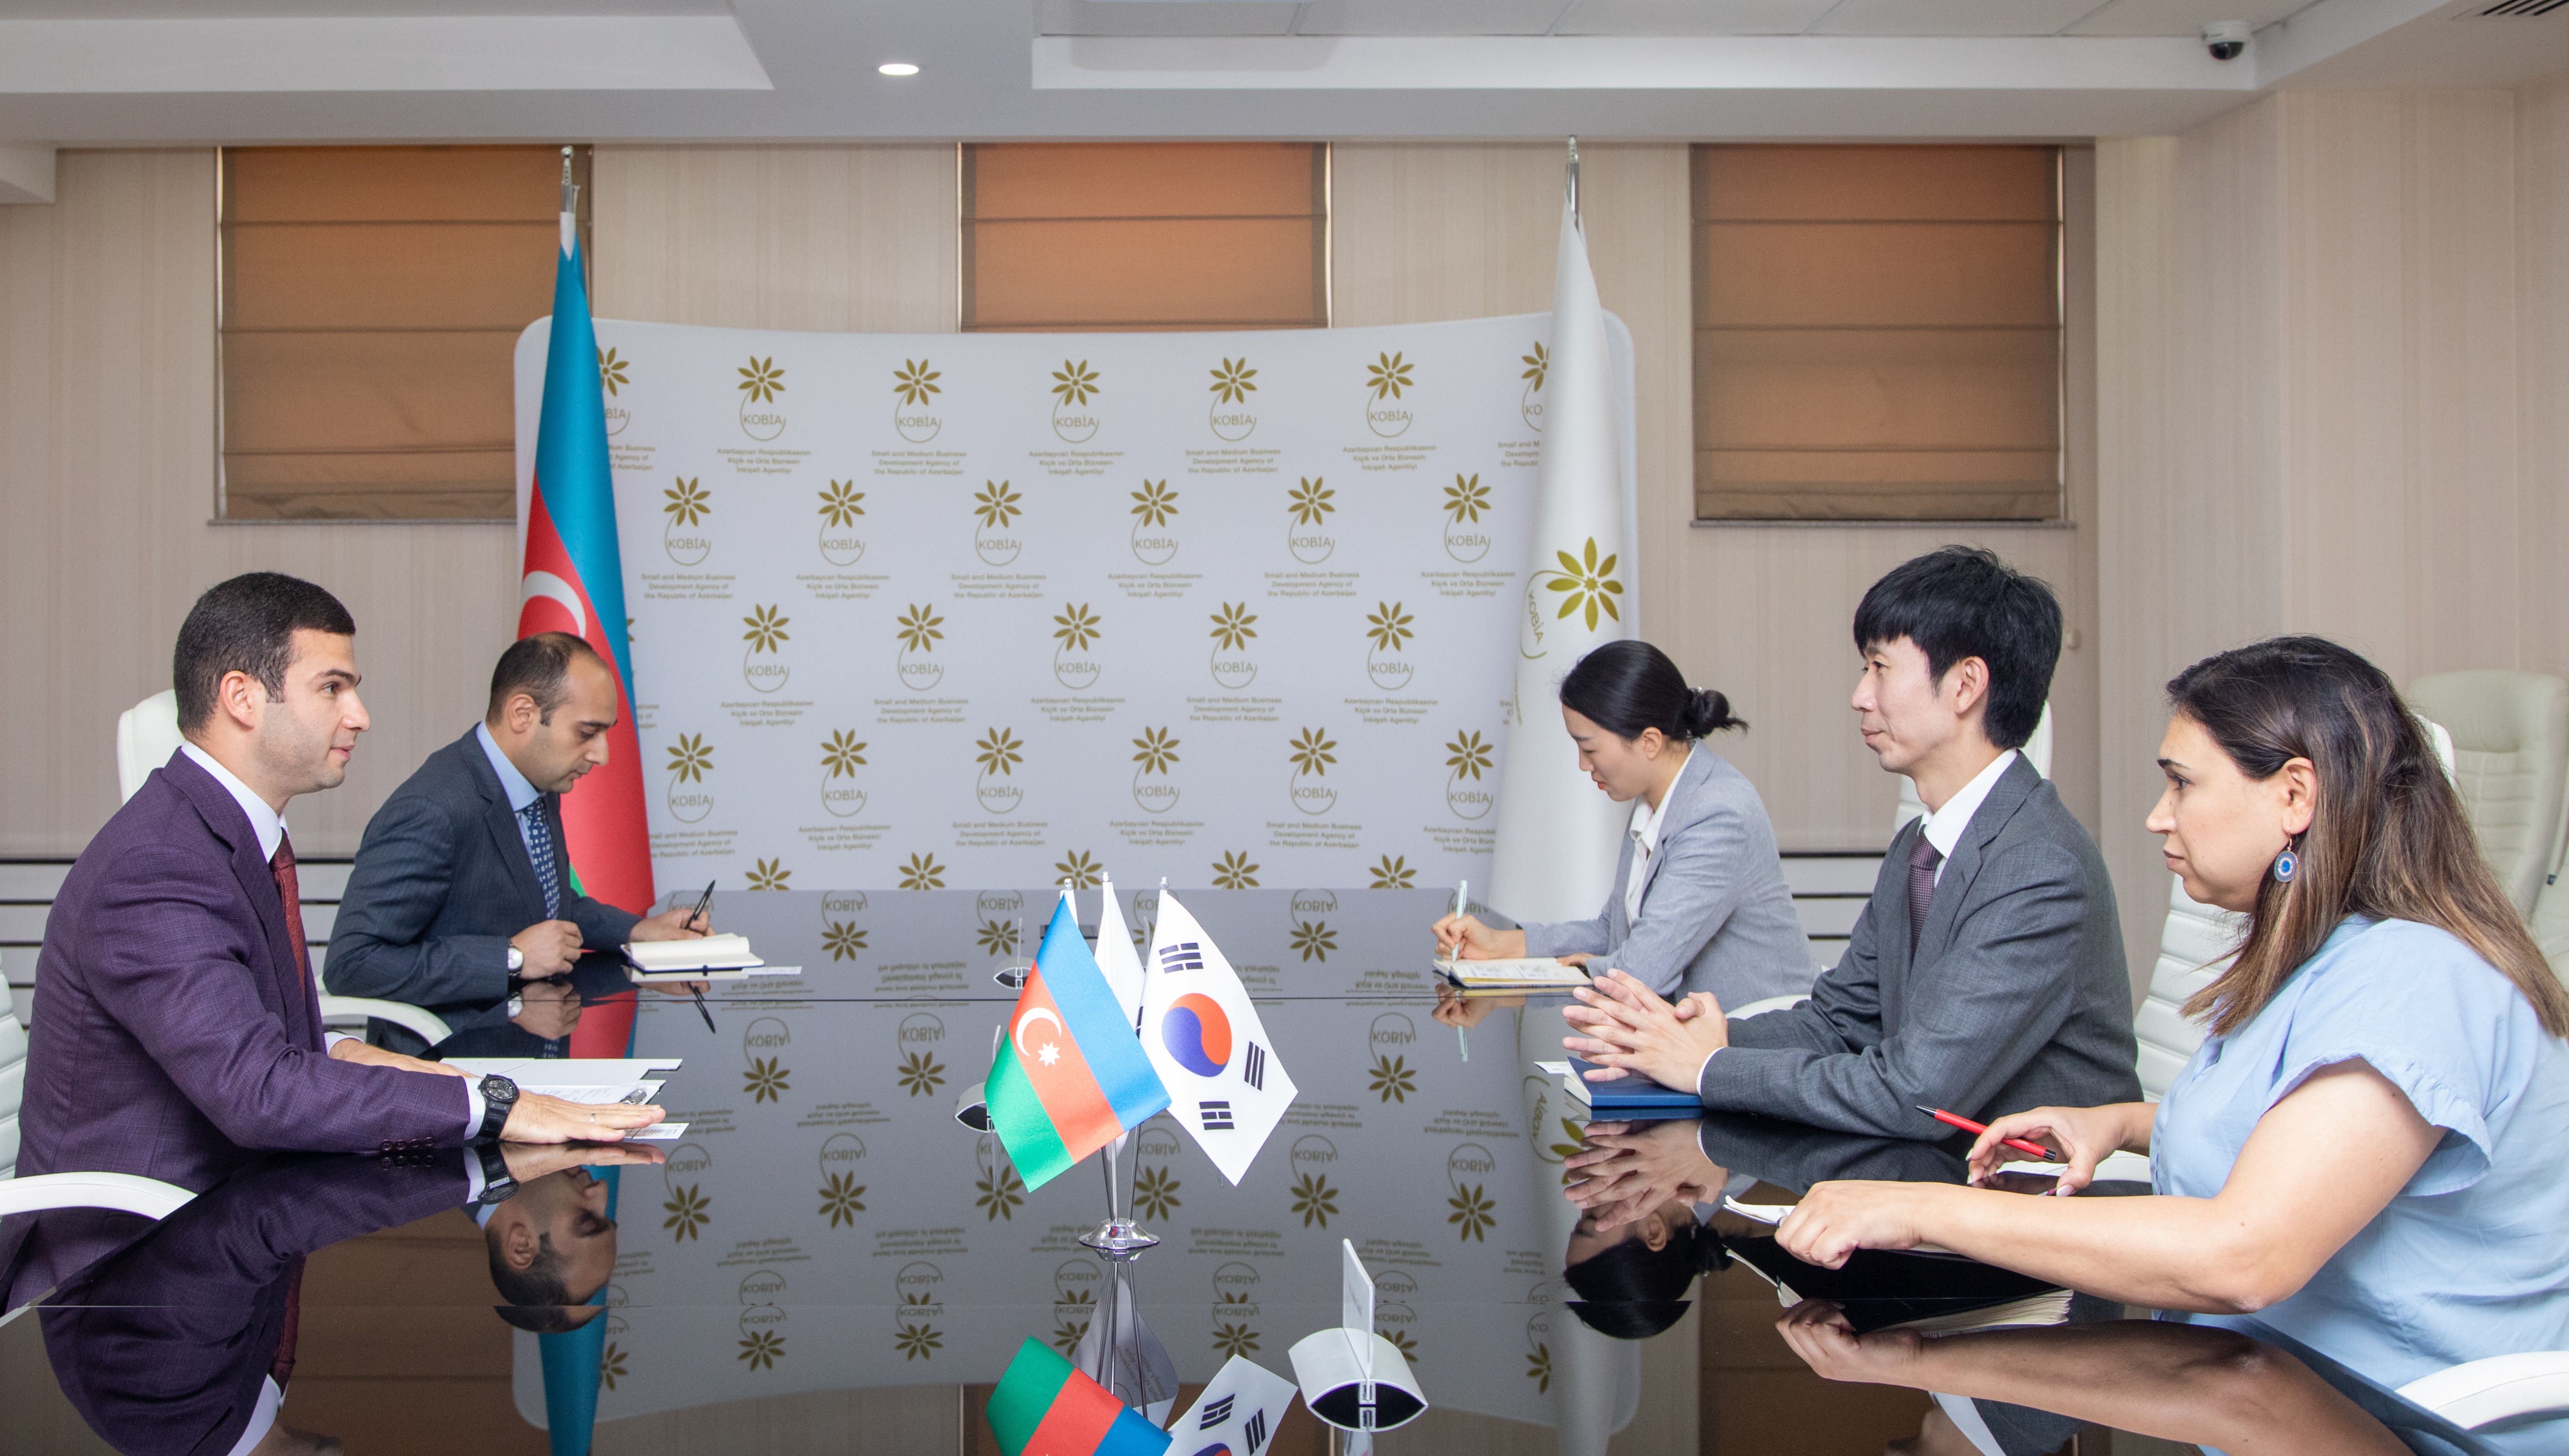 A meeting was held between KOBİA and KOICA